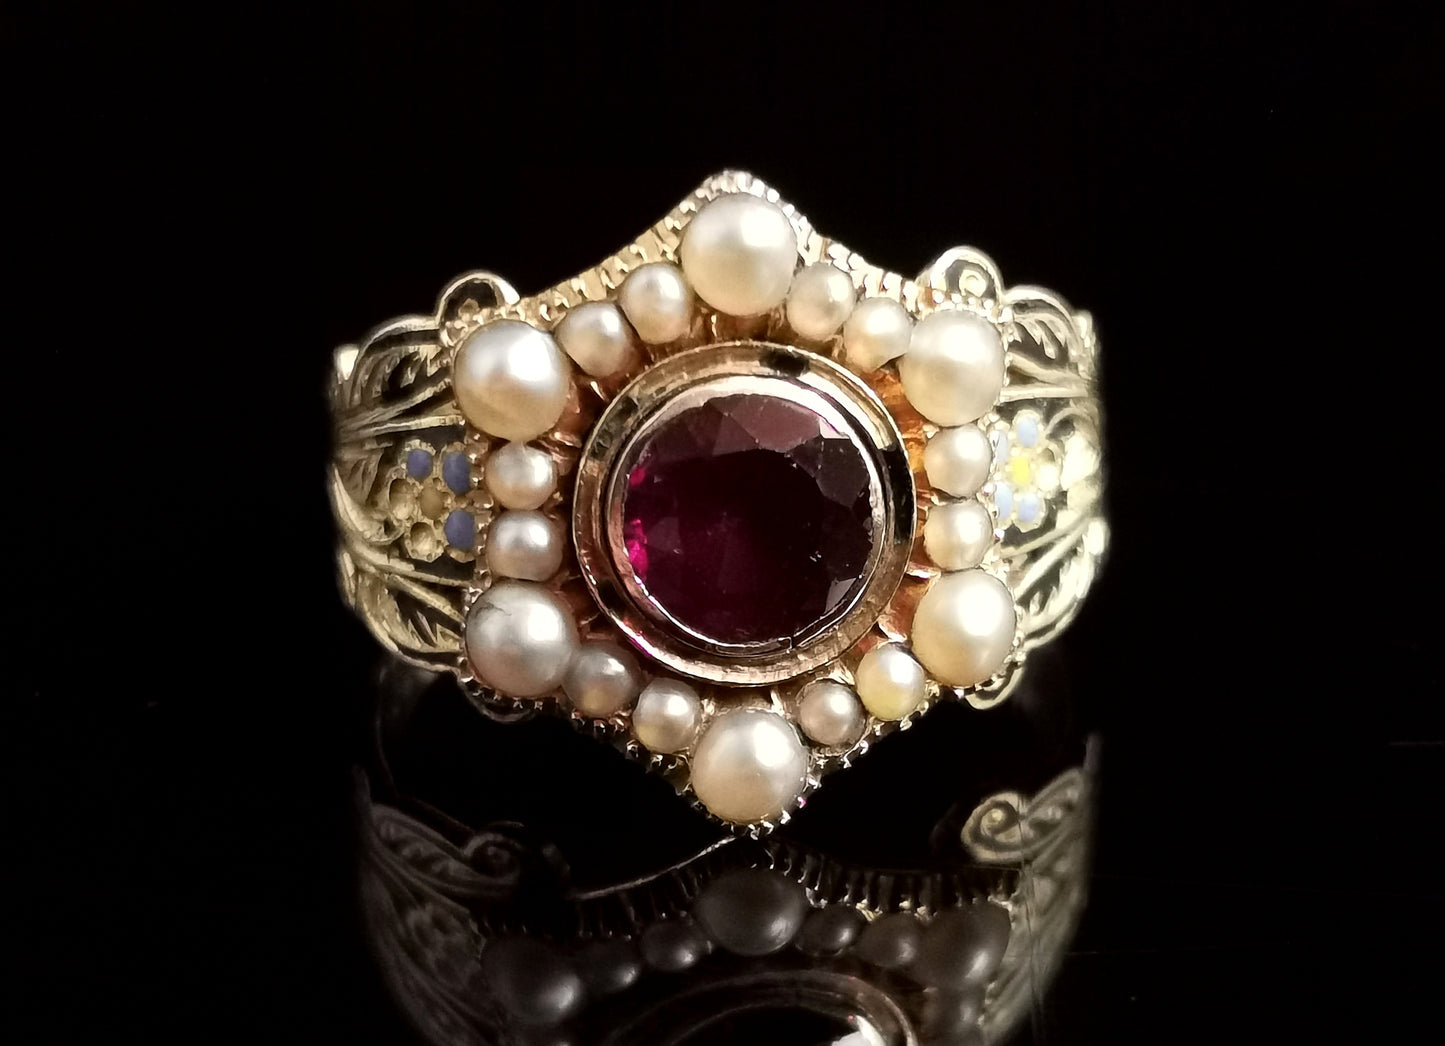 Antique Mourning ring, 18ct gold, Enamel, Pearl and Garnet, William IV